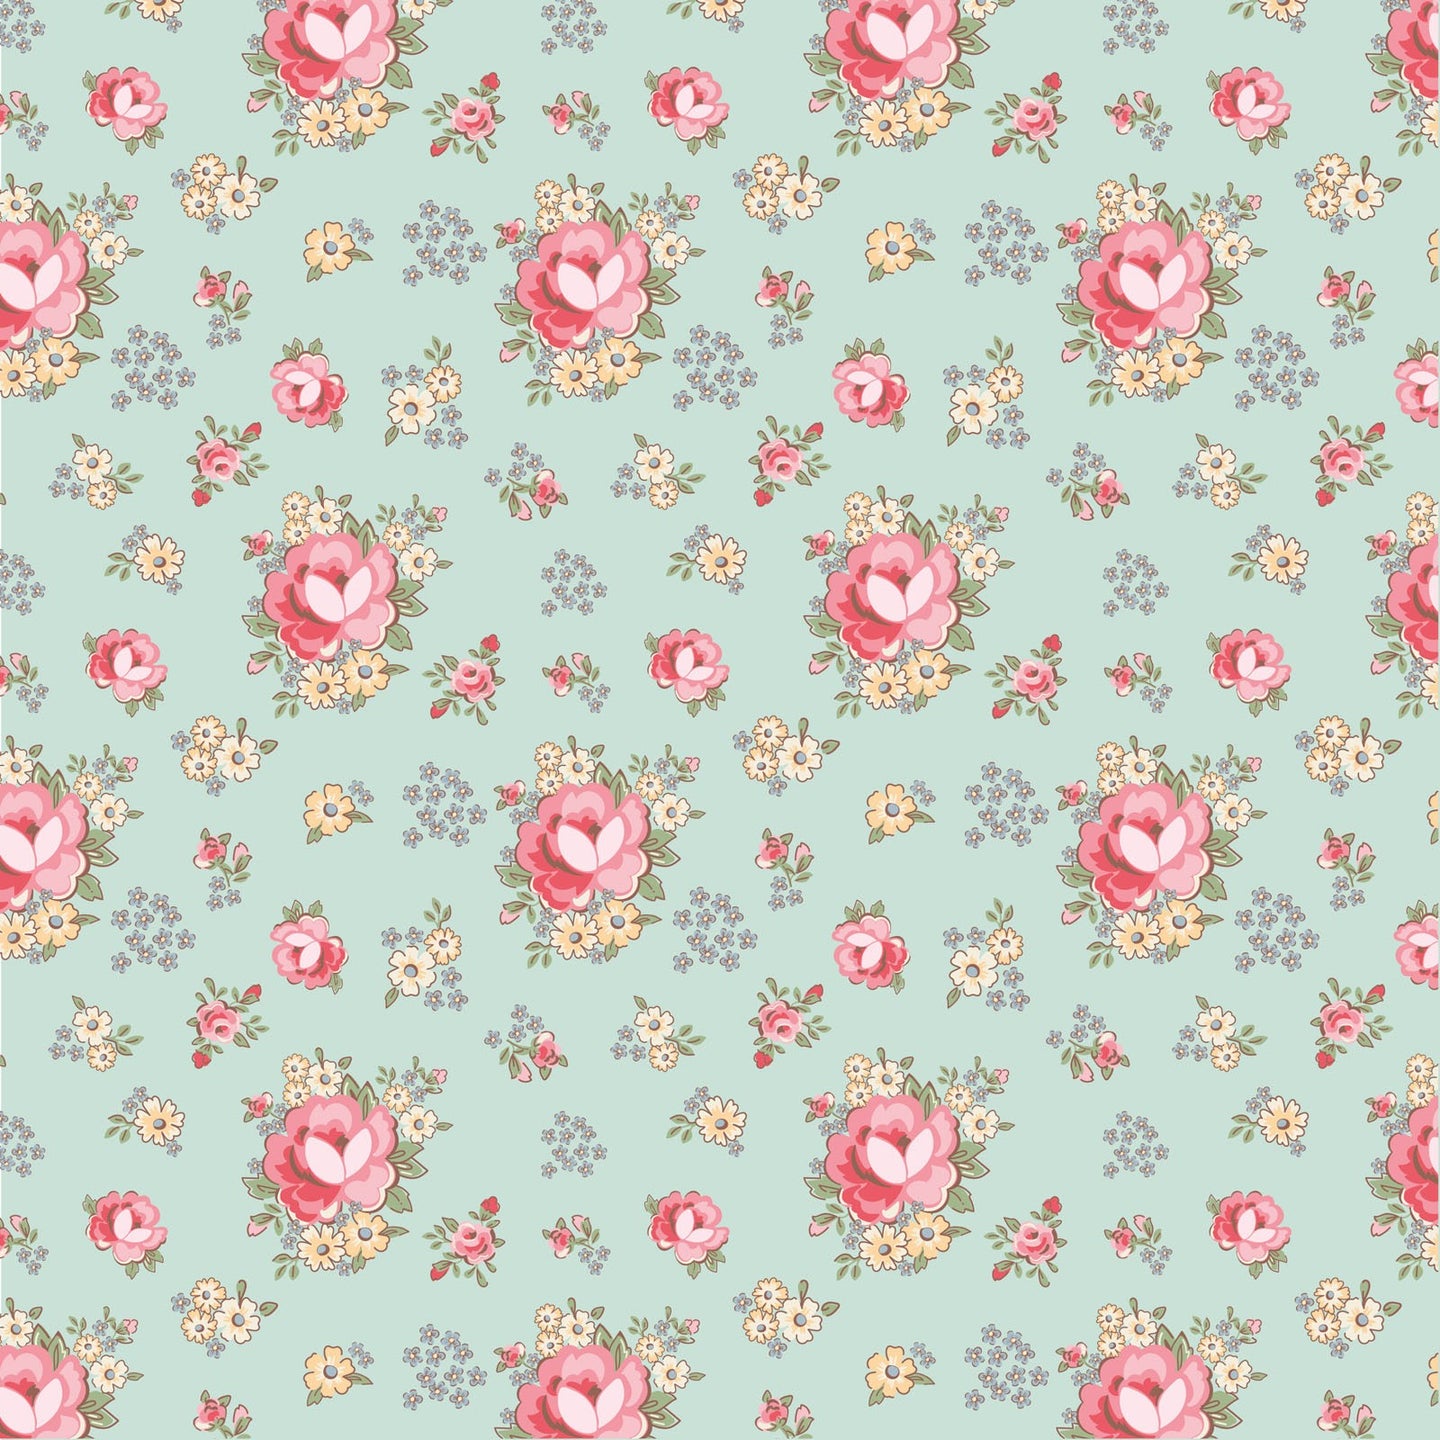 Fabric, Dots & Posies Primroses TEAL by Poppie Cotton (by the yard)